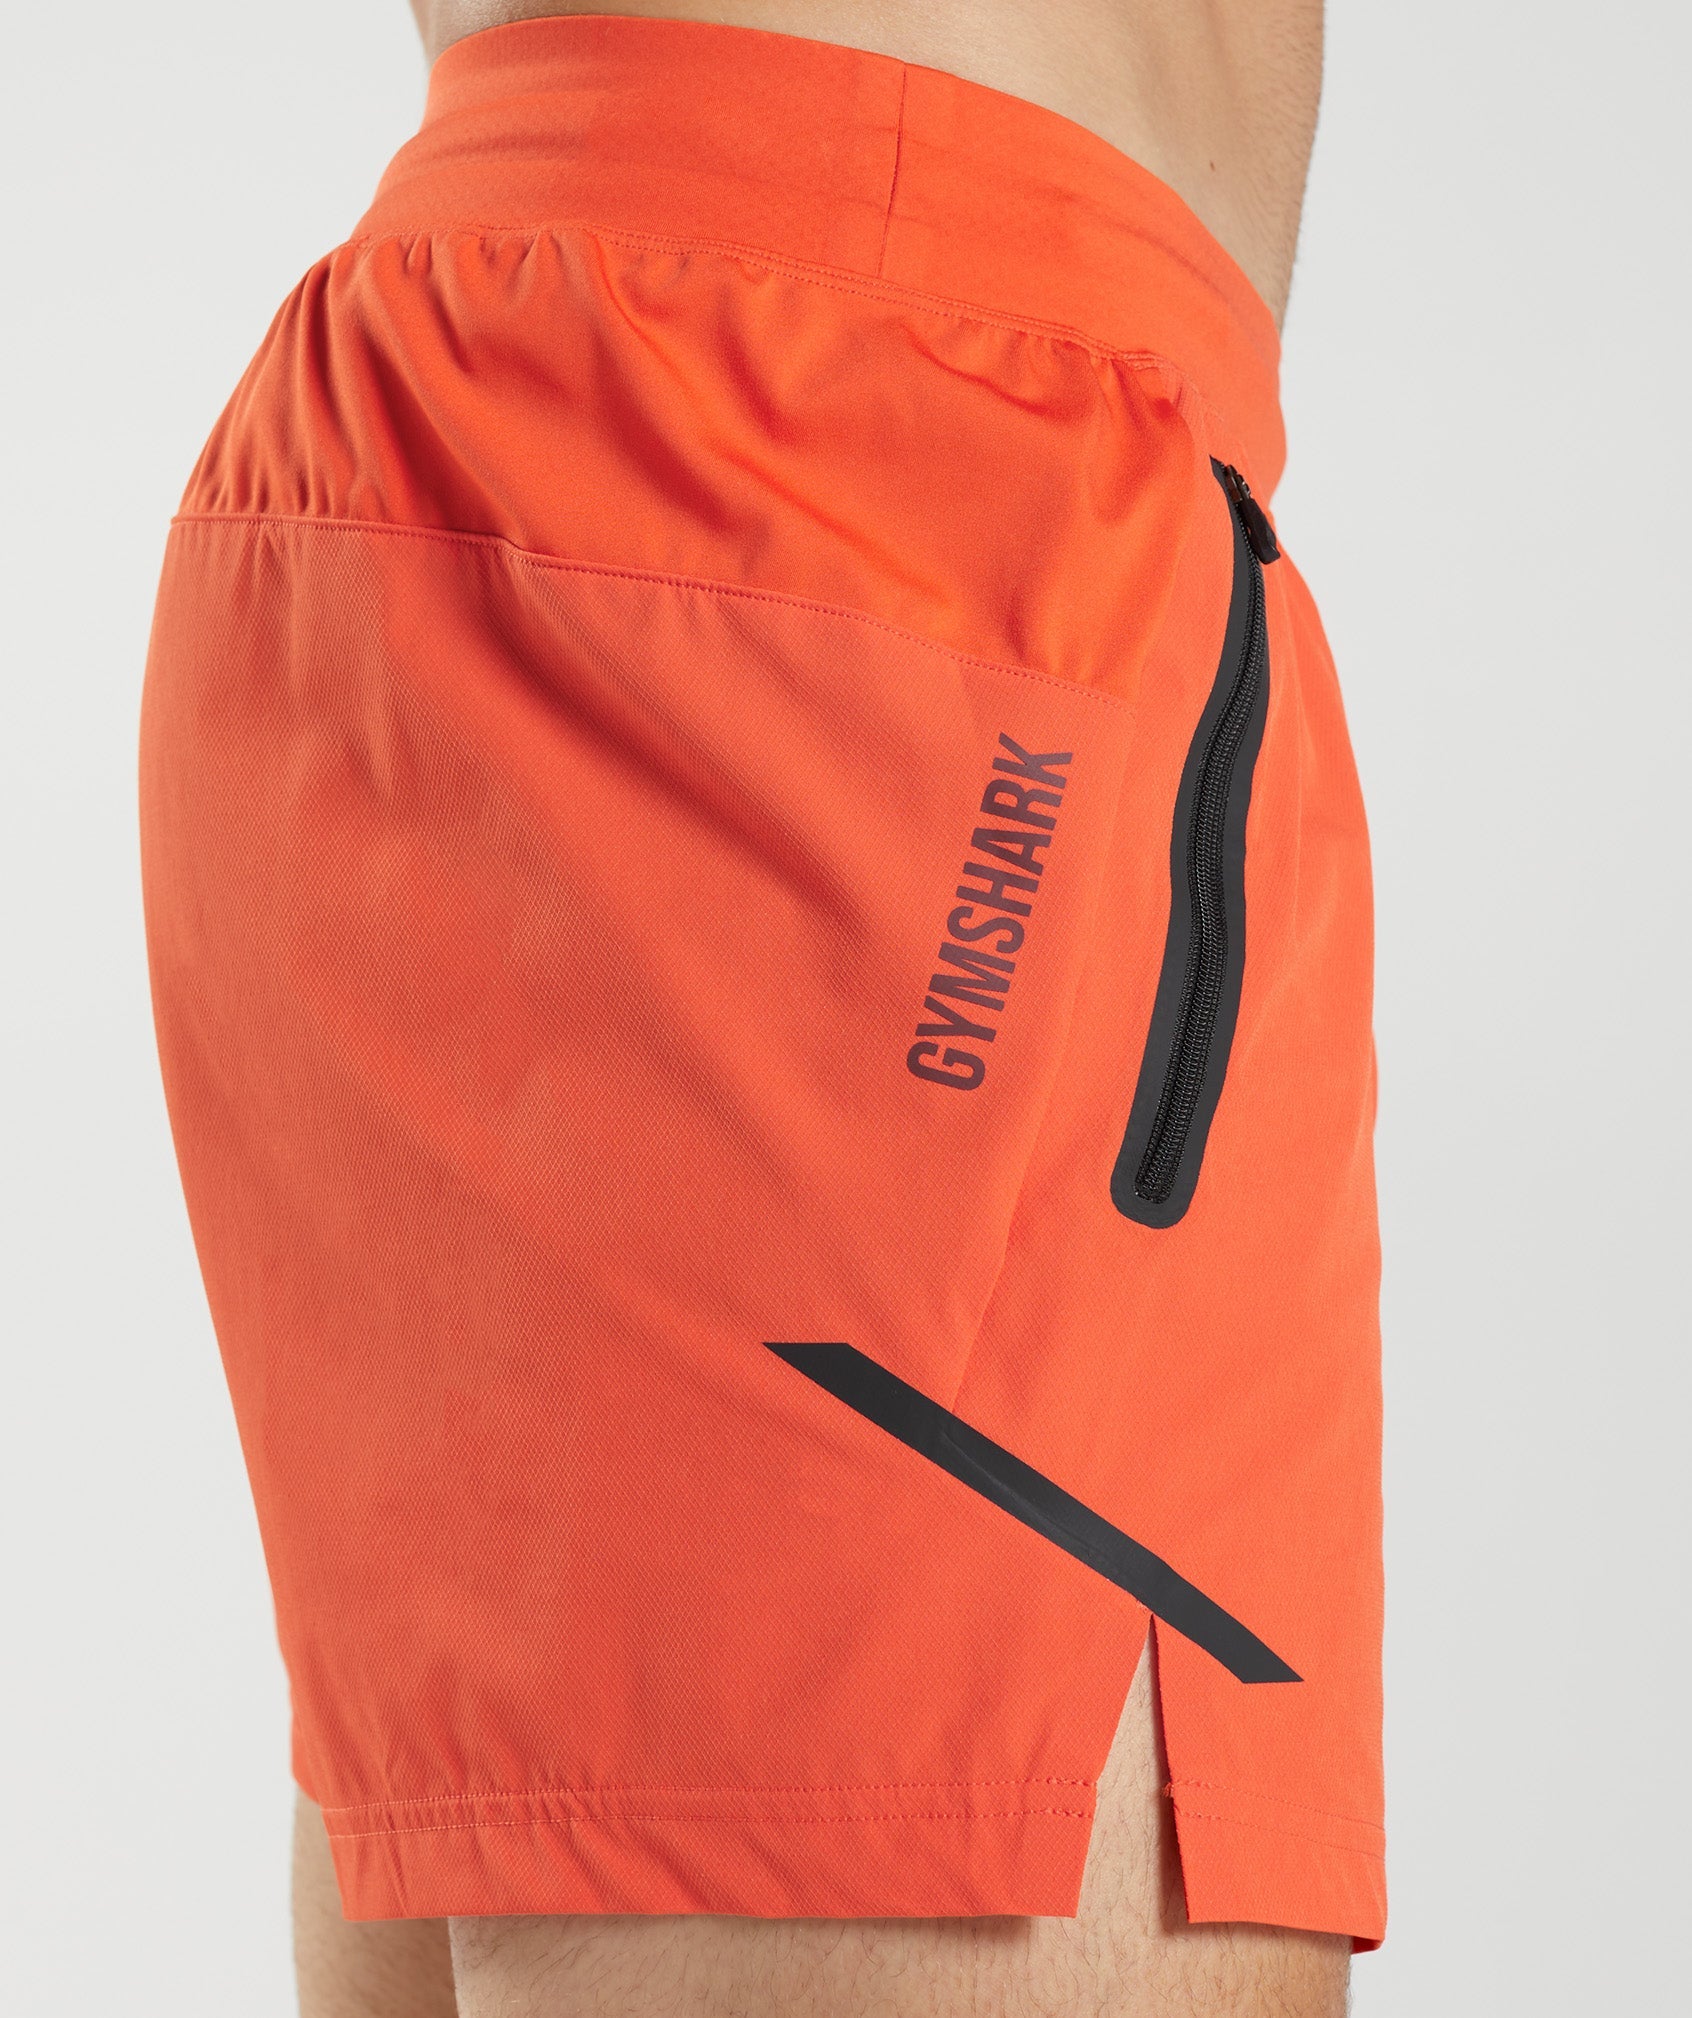 Apex 5" Perform Shorts in Pepper Red - view 5